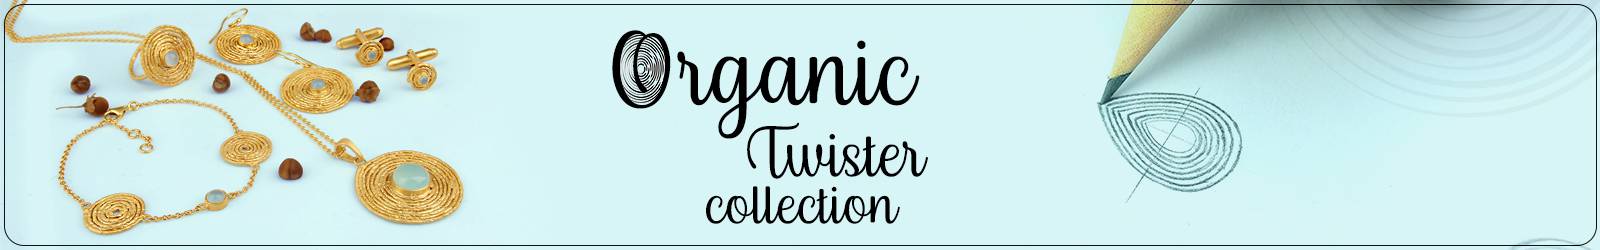 Wholesale Handmade Organic Twister Silver Jewelry Collection Manufacturer in Jaipur